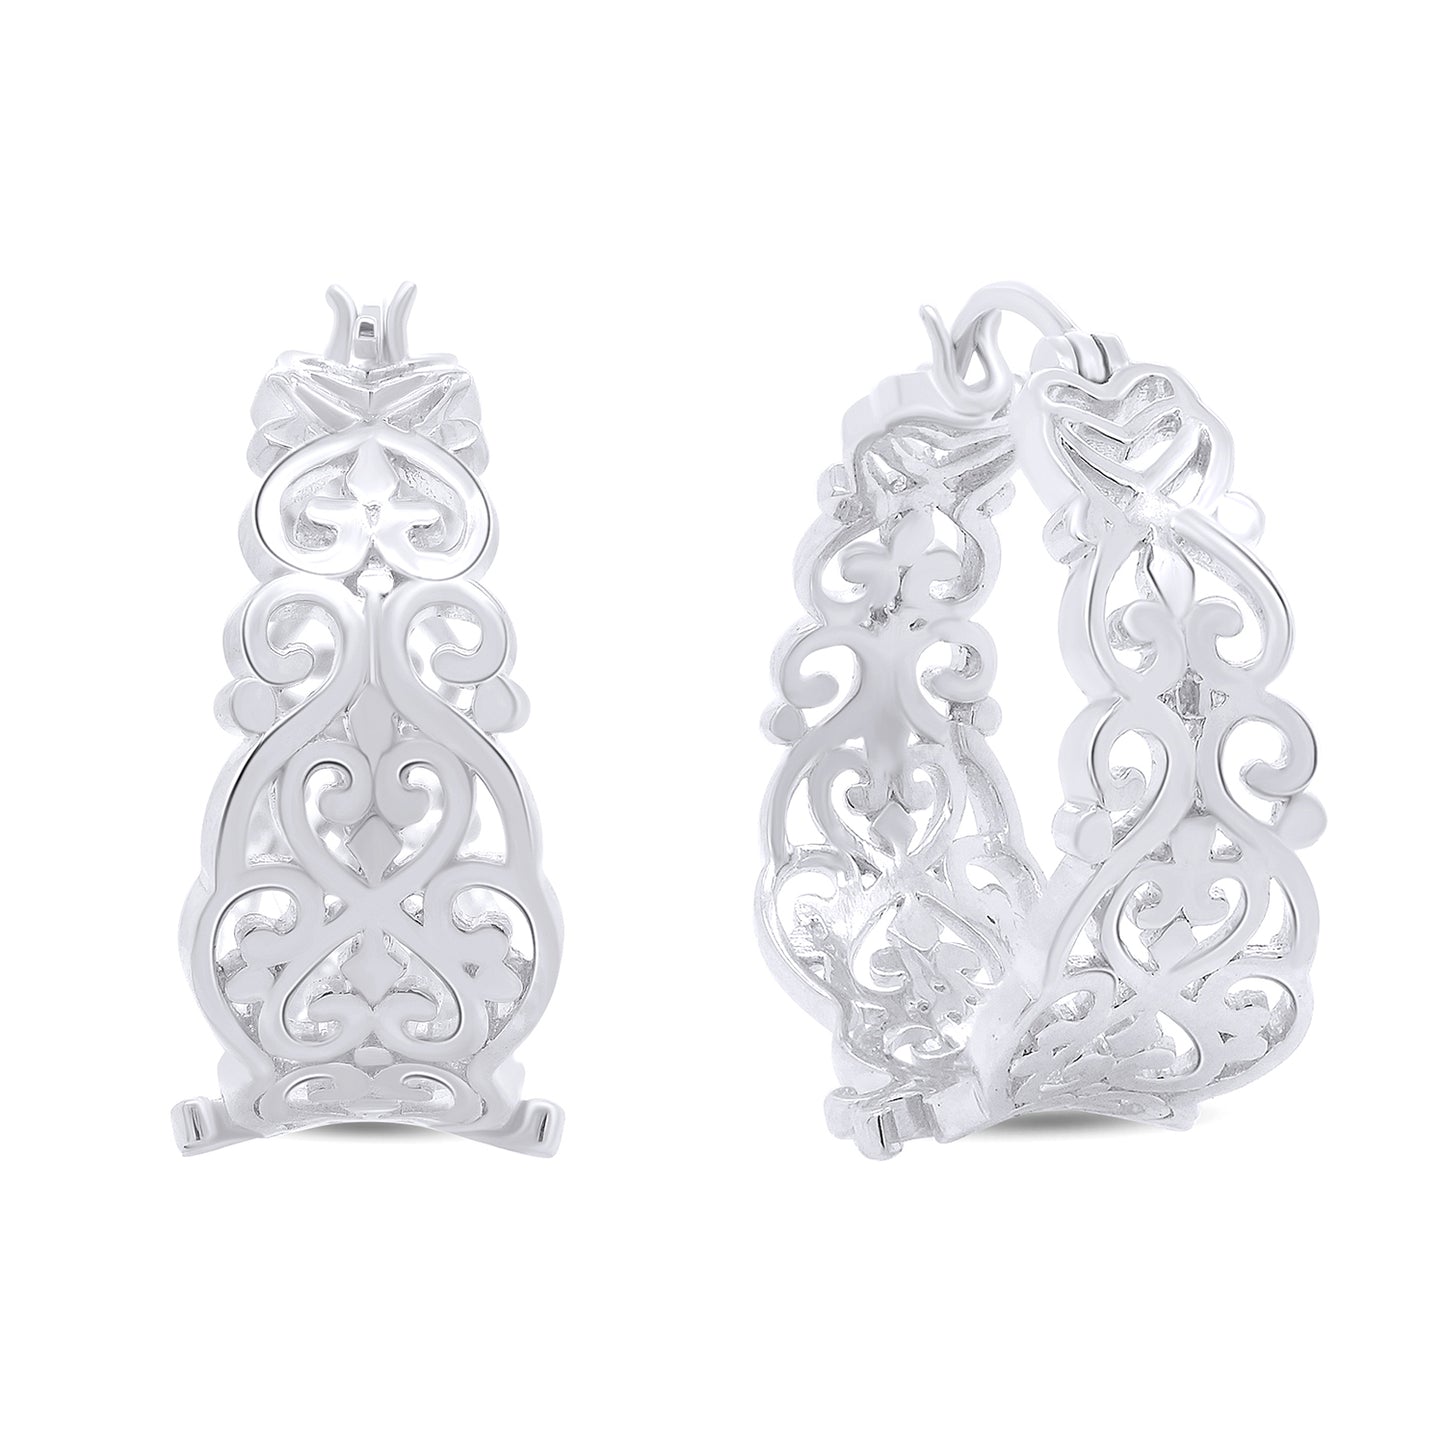 Textured Filigree Round Earrings for Women in 925 Sterling Silver